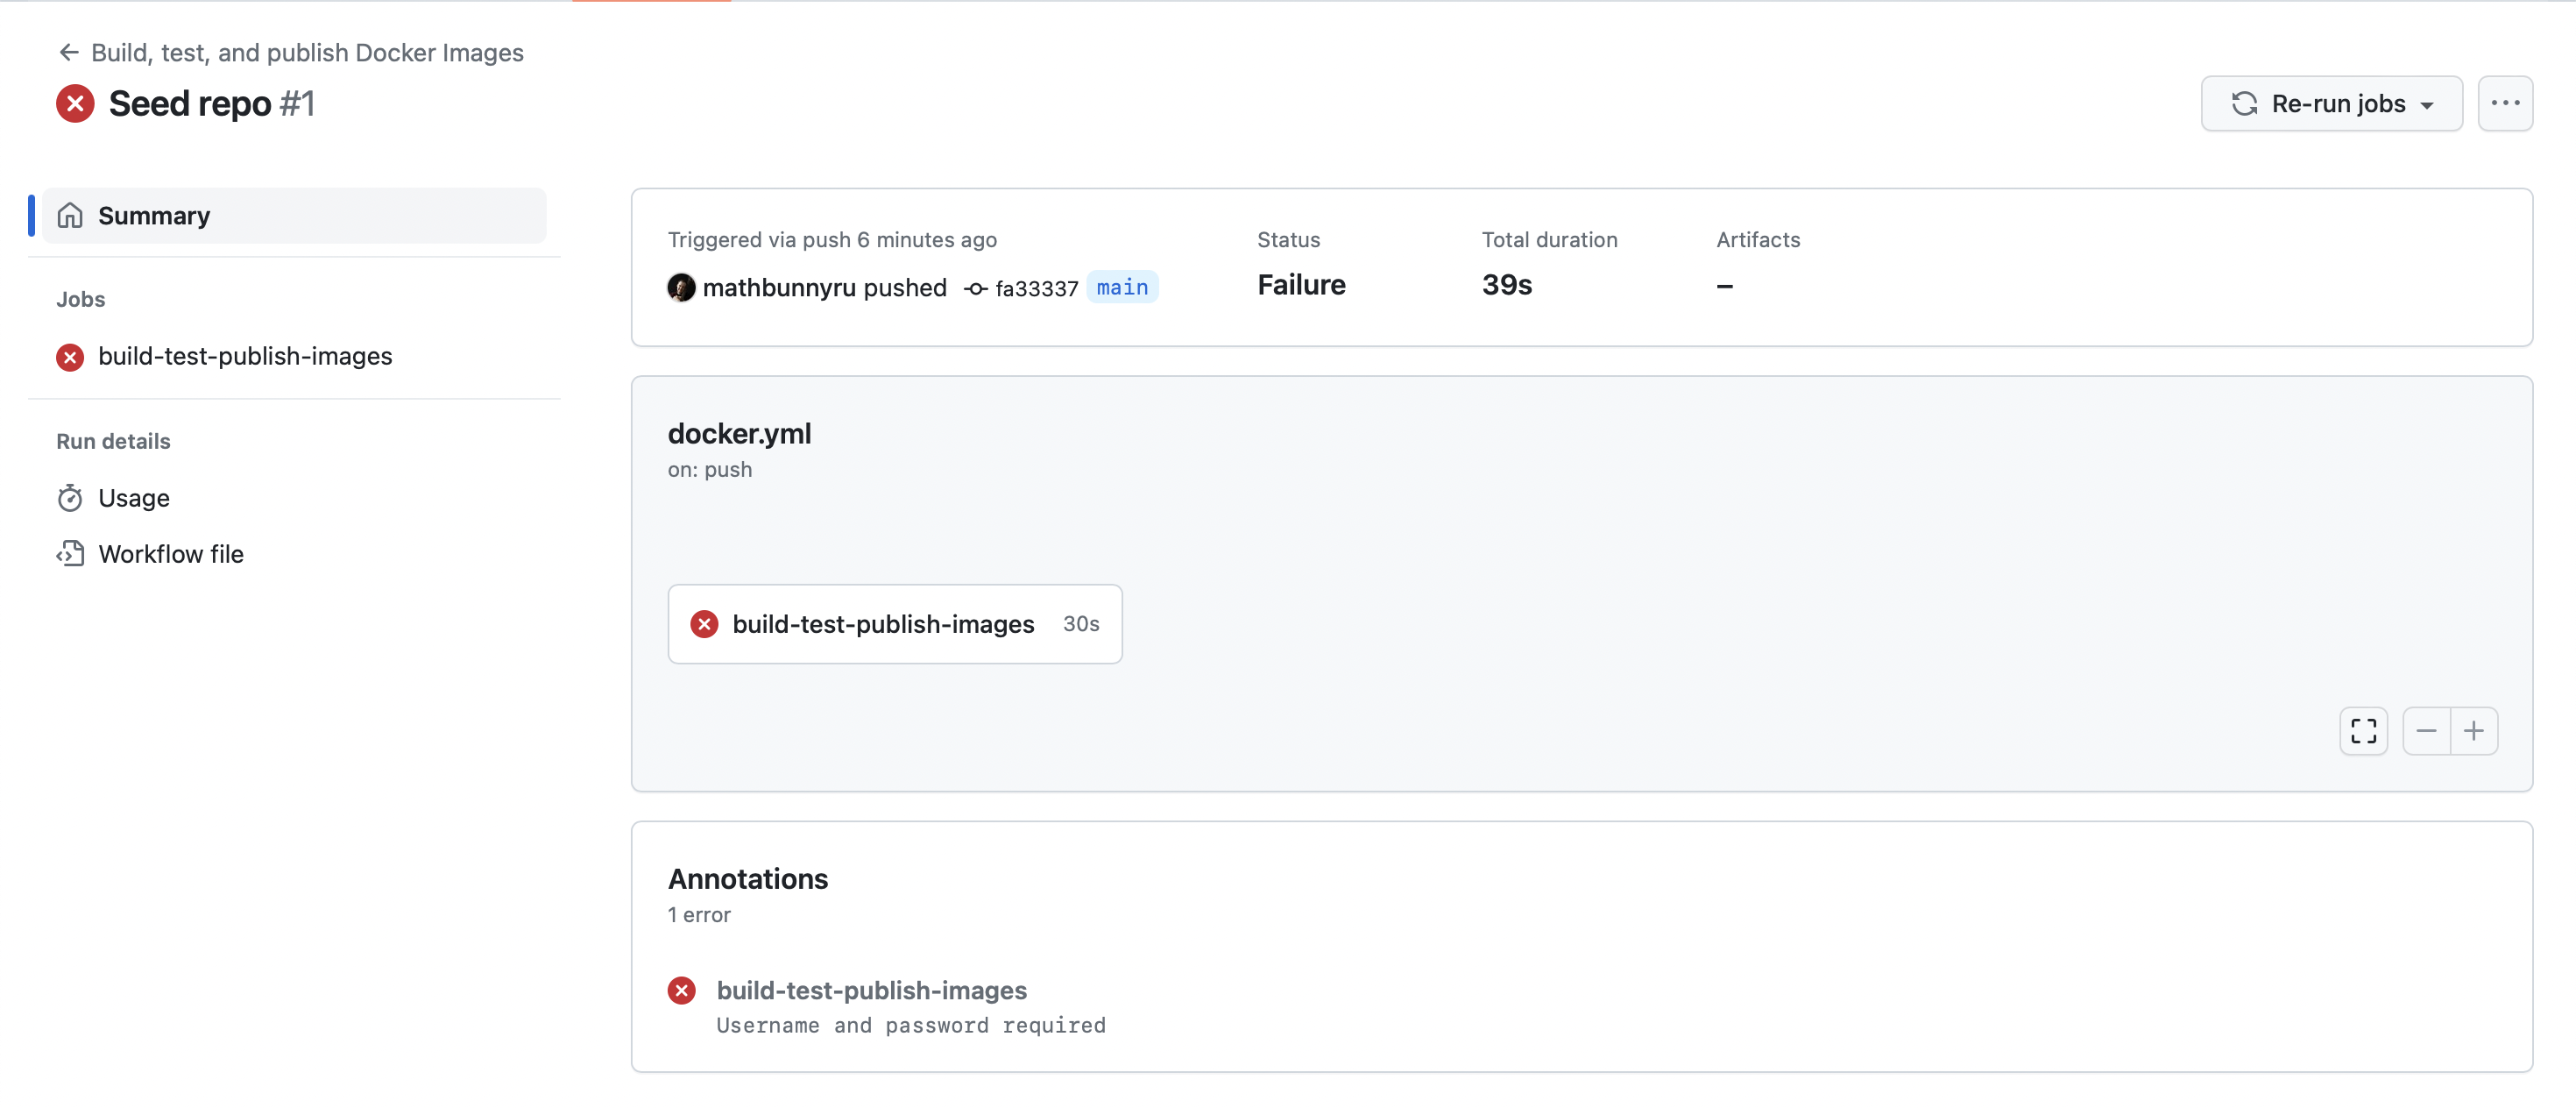 GitHub Actions page showing the "Build Docker Images" workflow